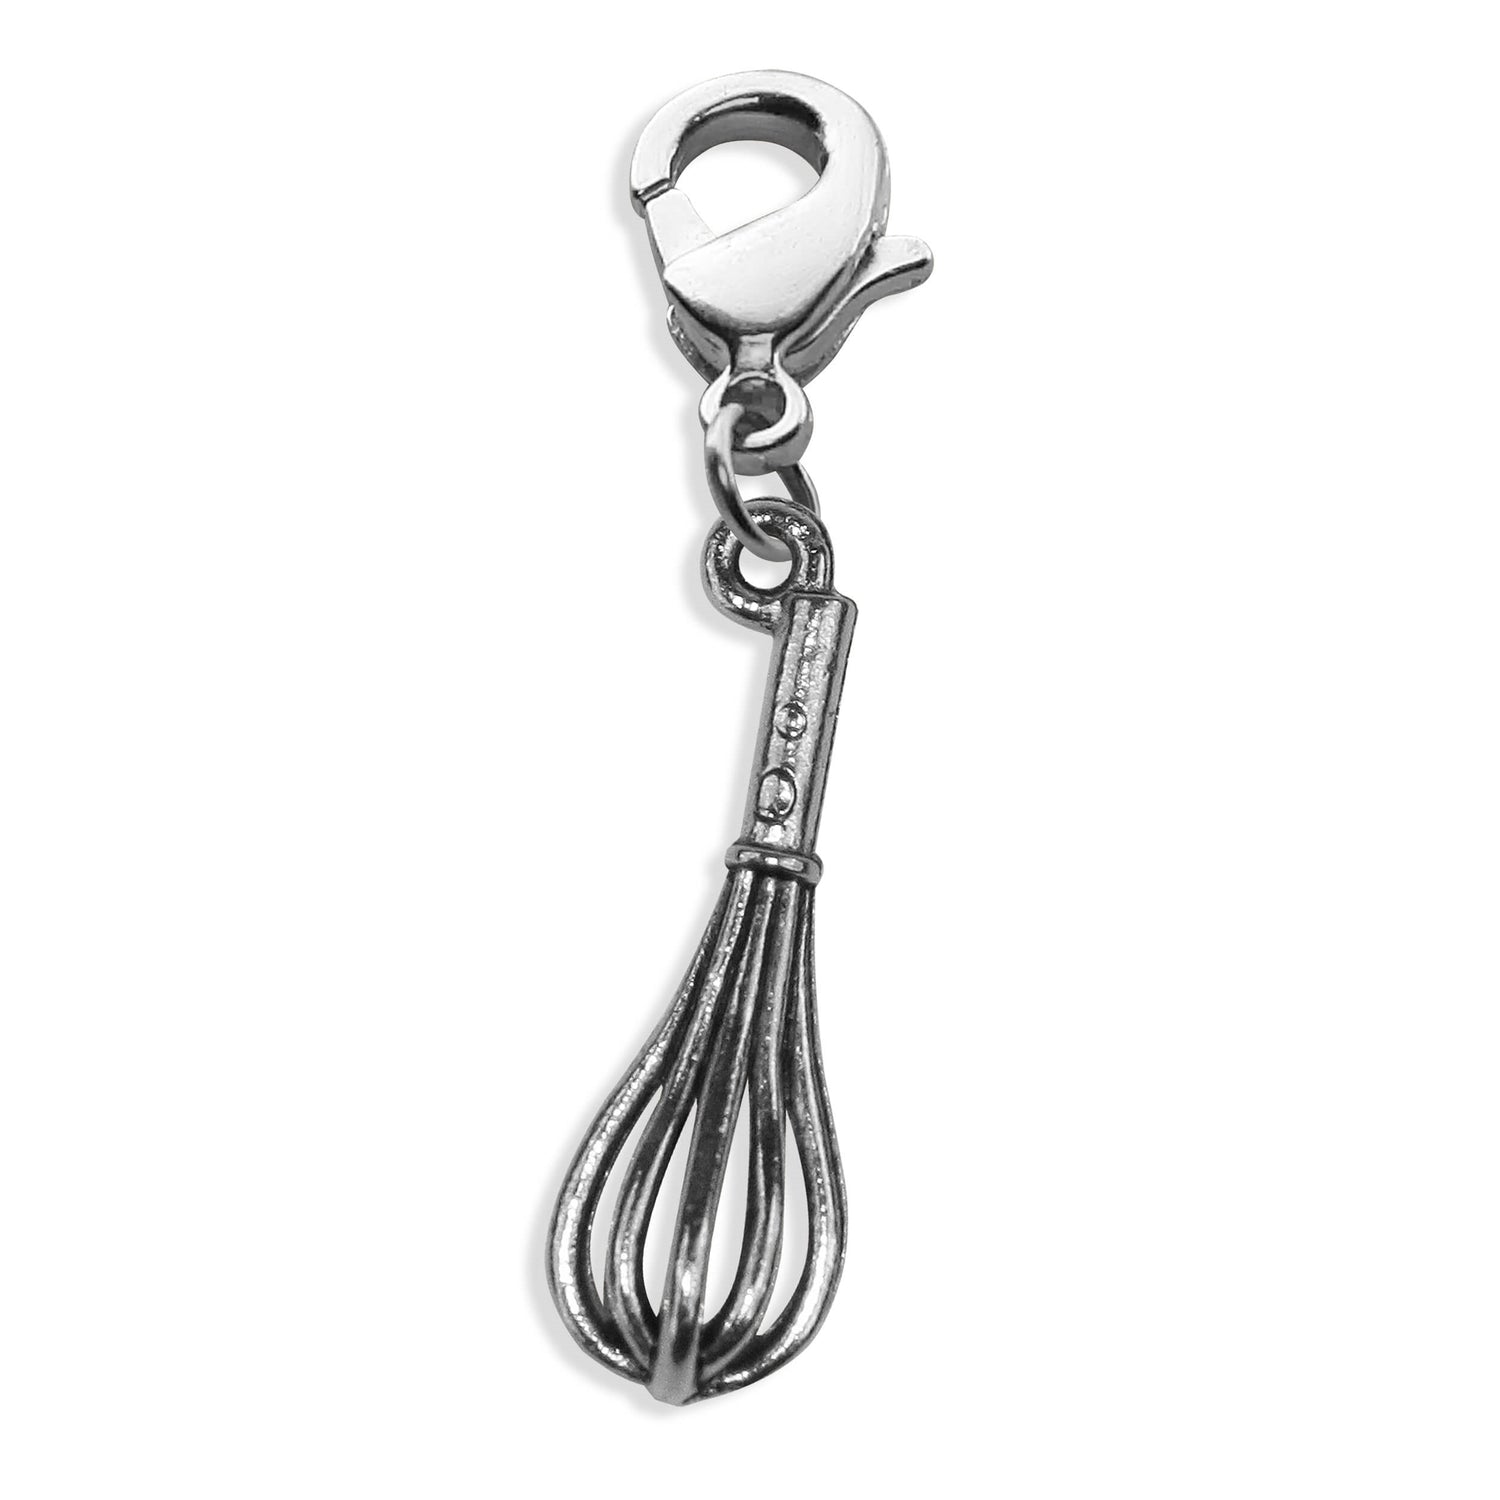 Whimsical Gifts | Whisk Charm Dangle in Silver Finish | Hobbies & Special Interests | Chef | Cooking | Baking Charm Dangle